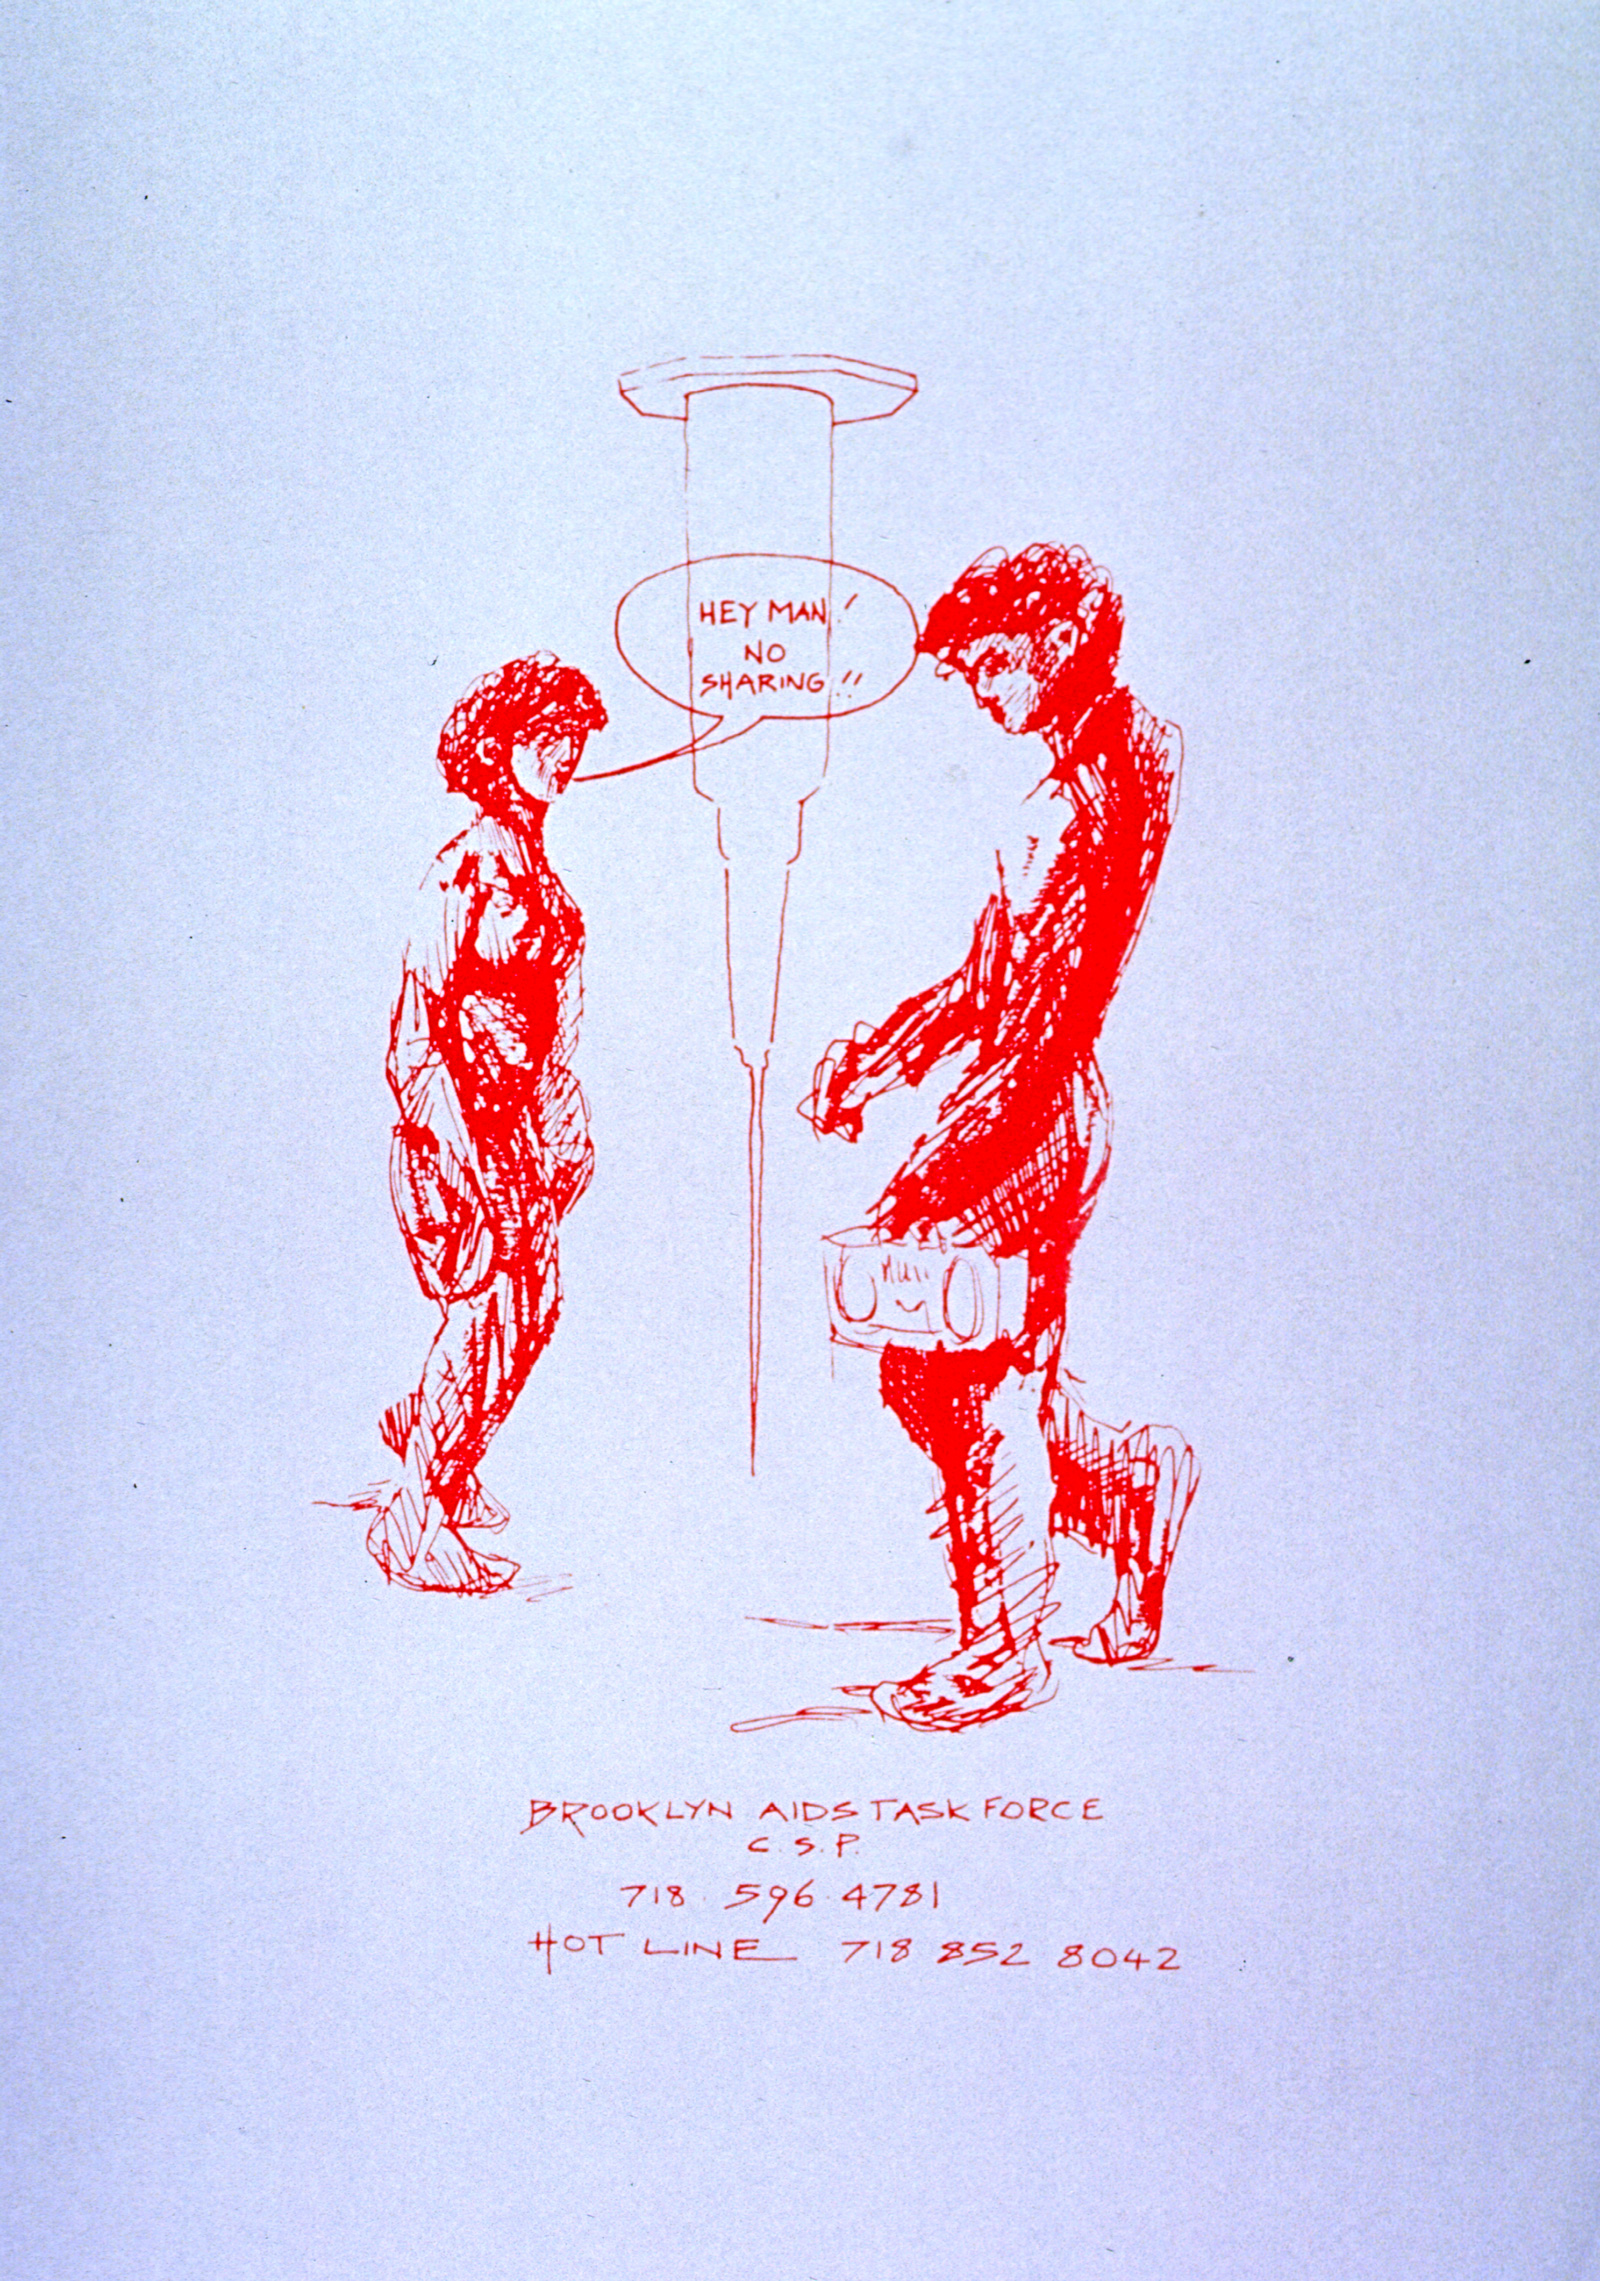 Drawing of two passing each other, one with a speech bubble that says, “Hey Man! No Sharing!!”, the other holding a boombox, and between them is a large syringe